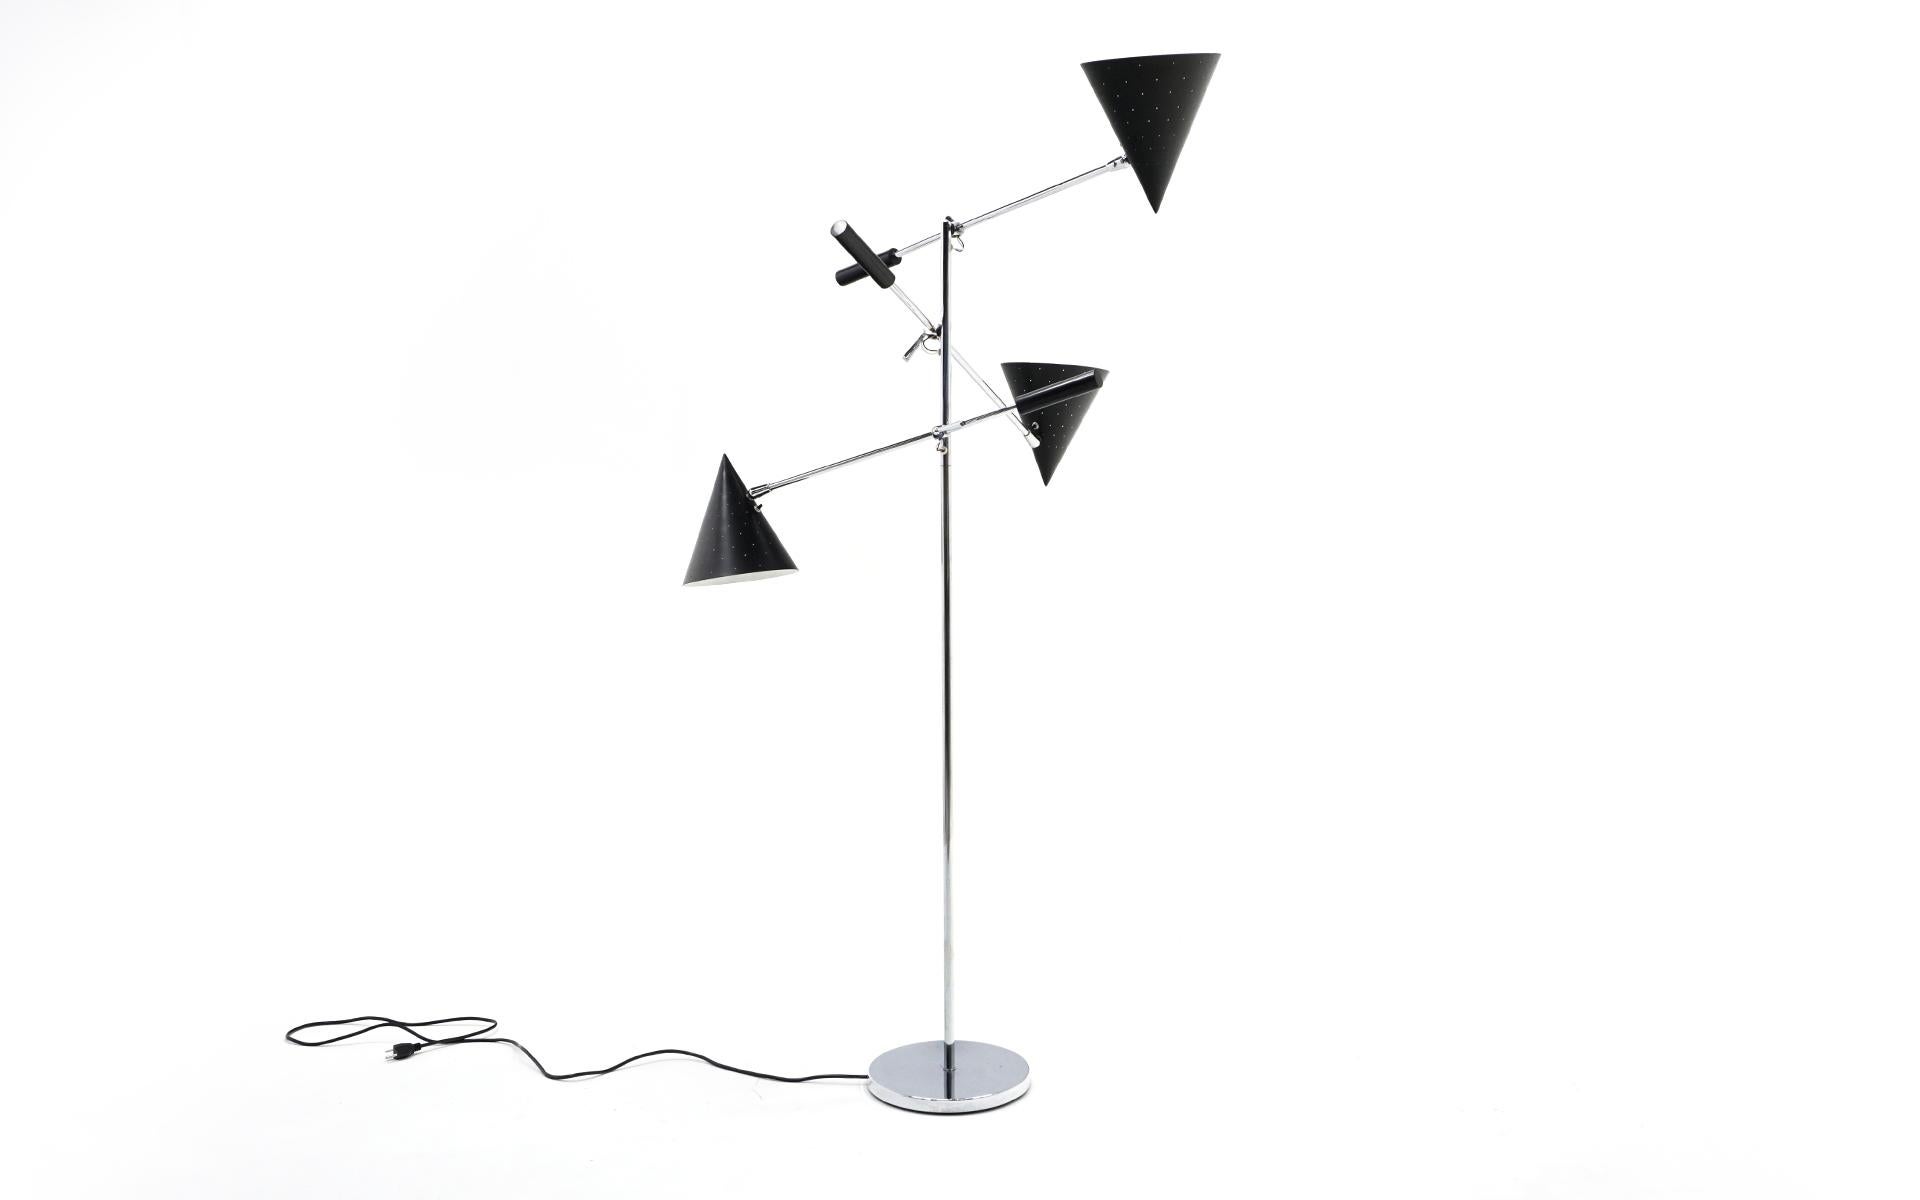 Three arm floor lamp in the style of Arredoluce. Chromed steel base, central support and arms. Black enameled perforated shades make for a striking appearance when turned on. There are individual switches for each shade. Base diameter is 11.25